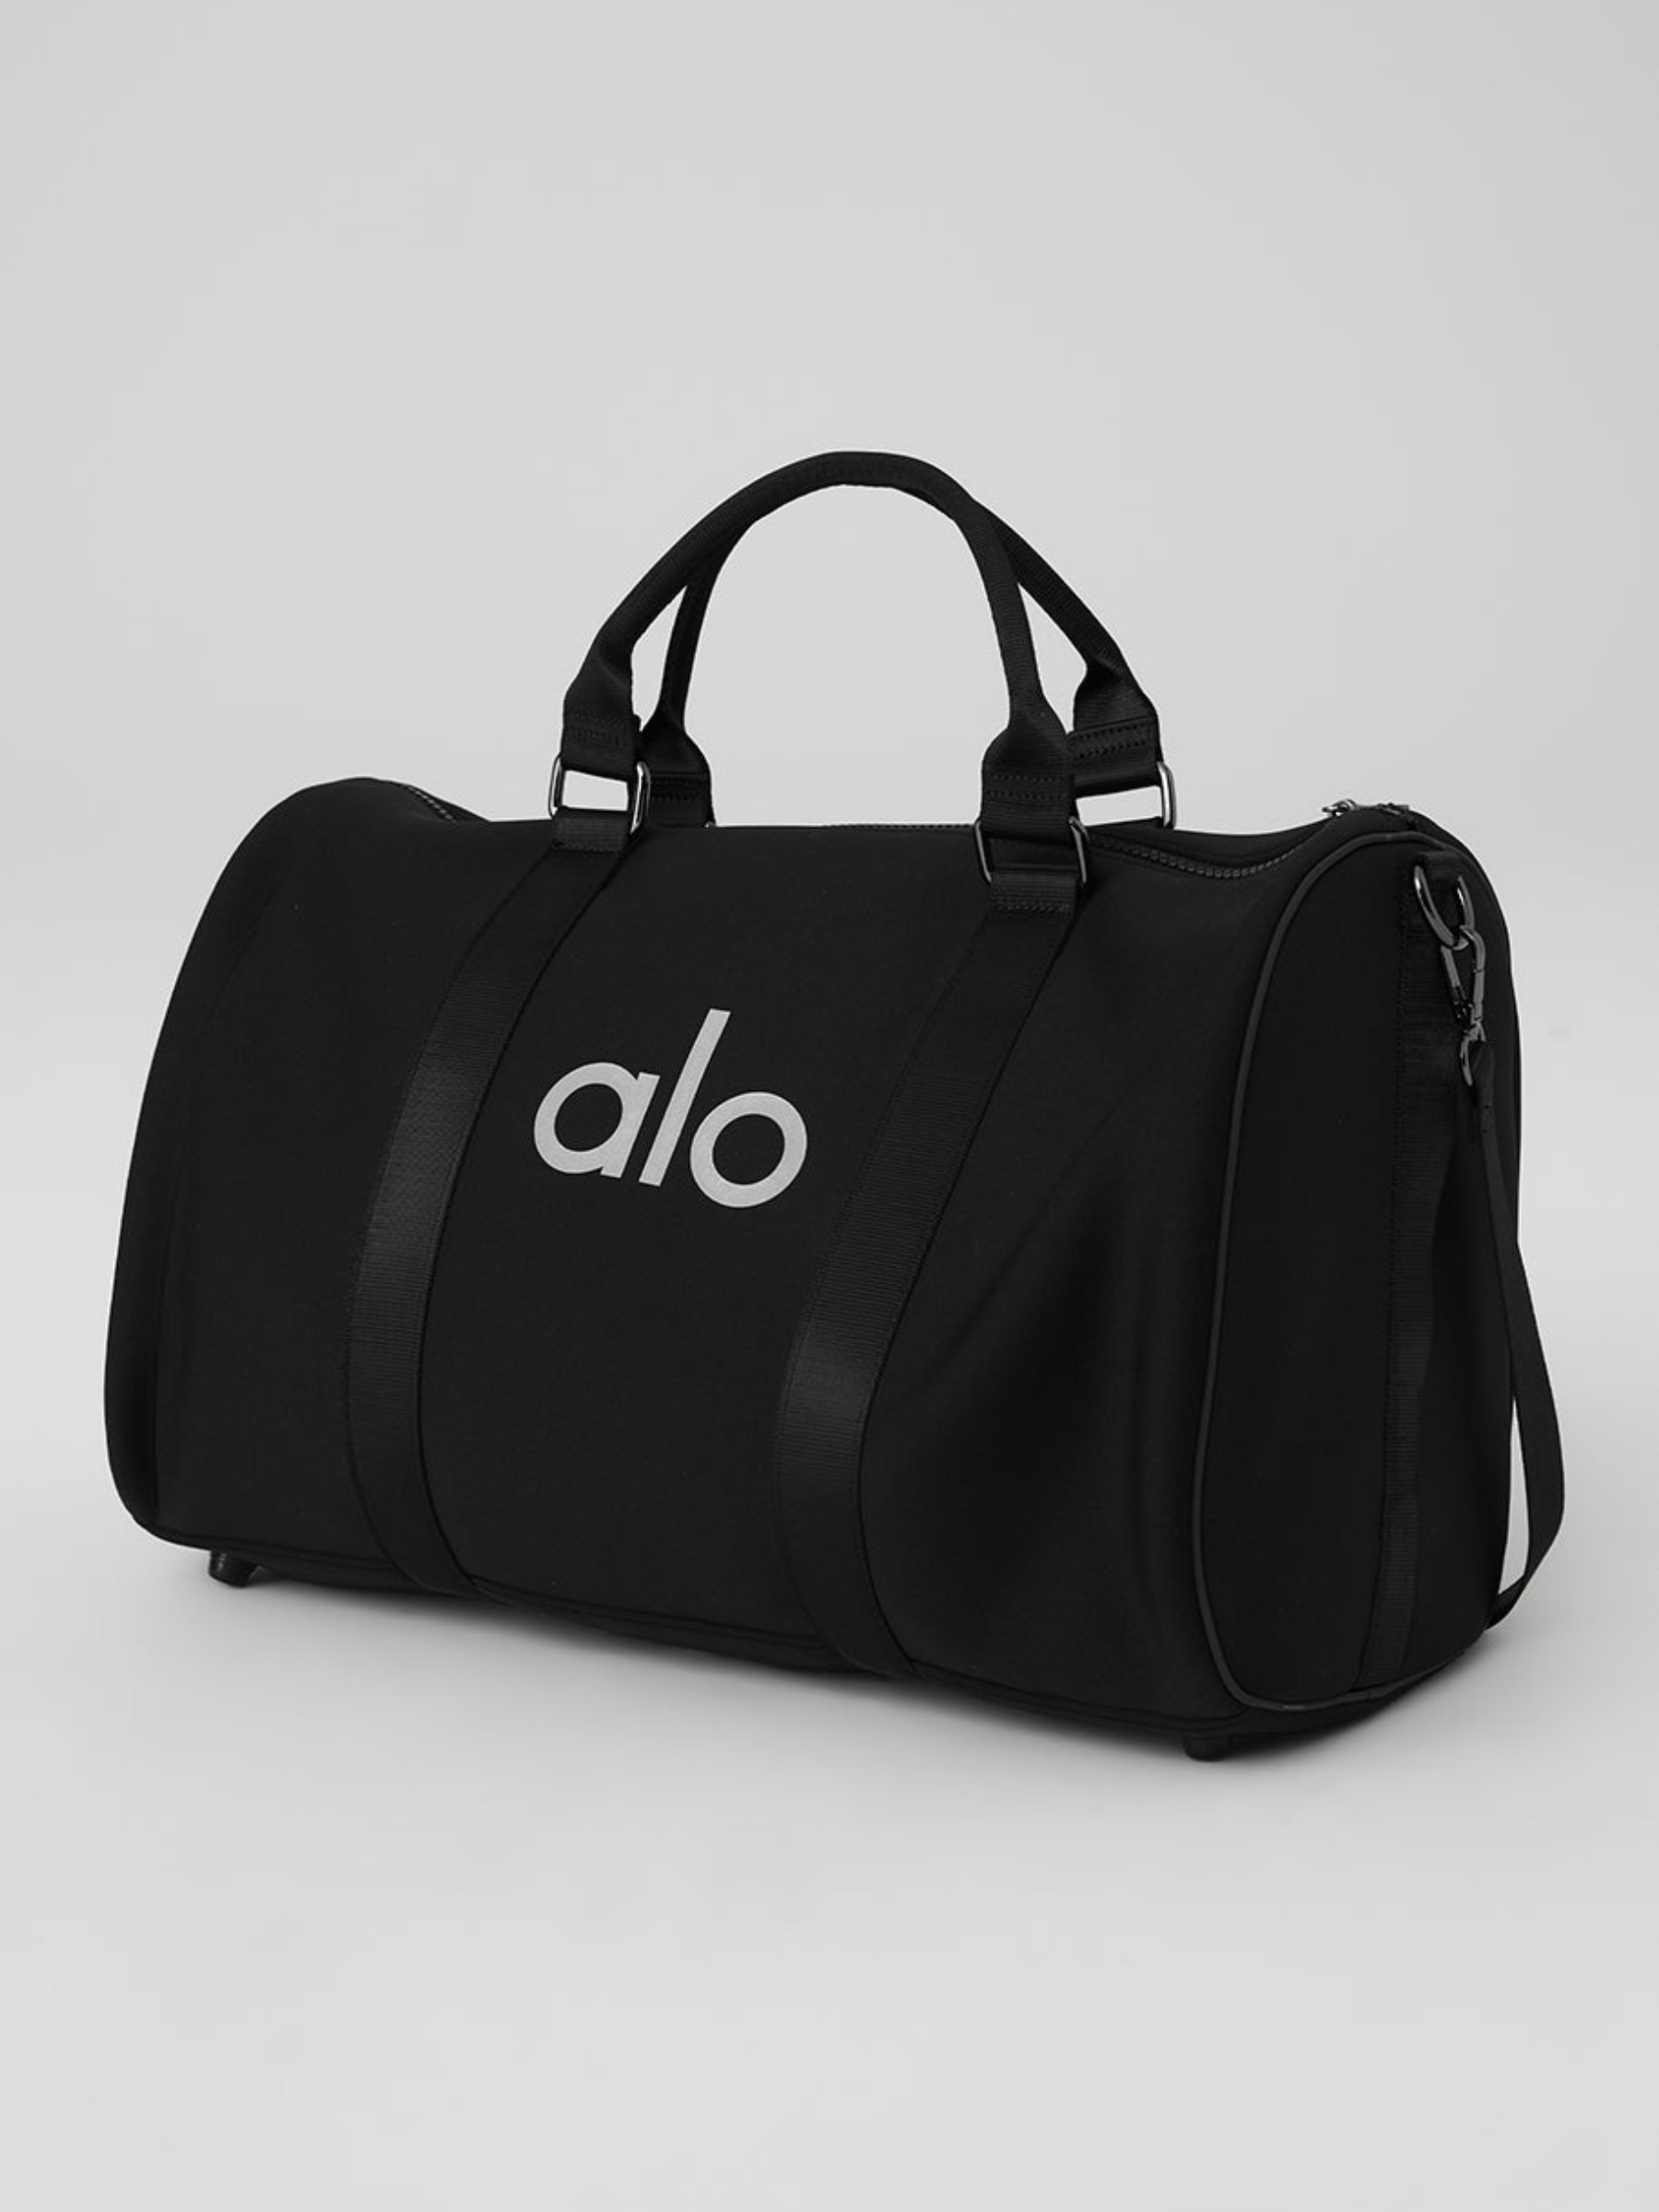 Whether they're always at the gym or just getting started on their fitness journey, they'll need a durable duffle bag. Alo's signature one is on the larger side, features handy pockets on the interior and exterior, and comes with a detachable carrying strap. $158, Alo. <a href="https://www.aloyoga.com/products/a0366u-traverse-duffle-black-silver">Get it now!</a><p>Sign up for today’s biggest stories, from pop culture to politics.</p><a href="https://www.glamour.com/newsletter/news?sourceCode=msnsend">Sign Up</a>